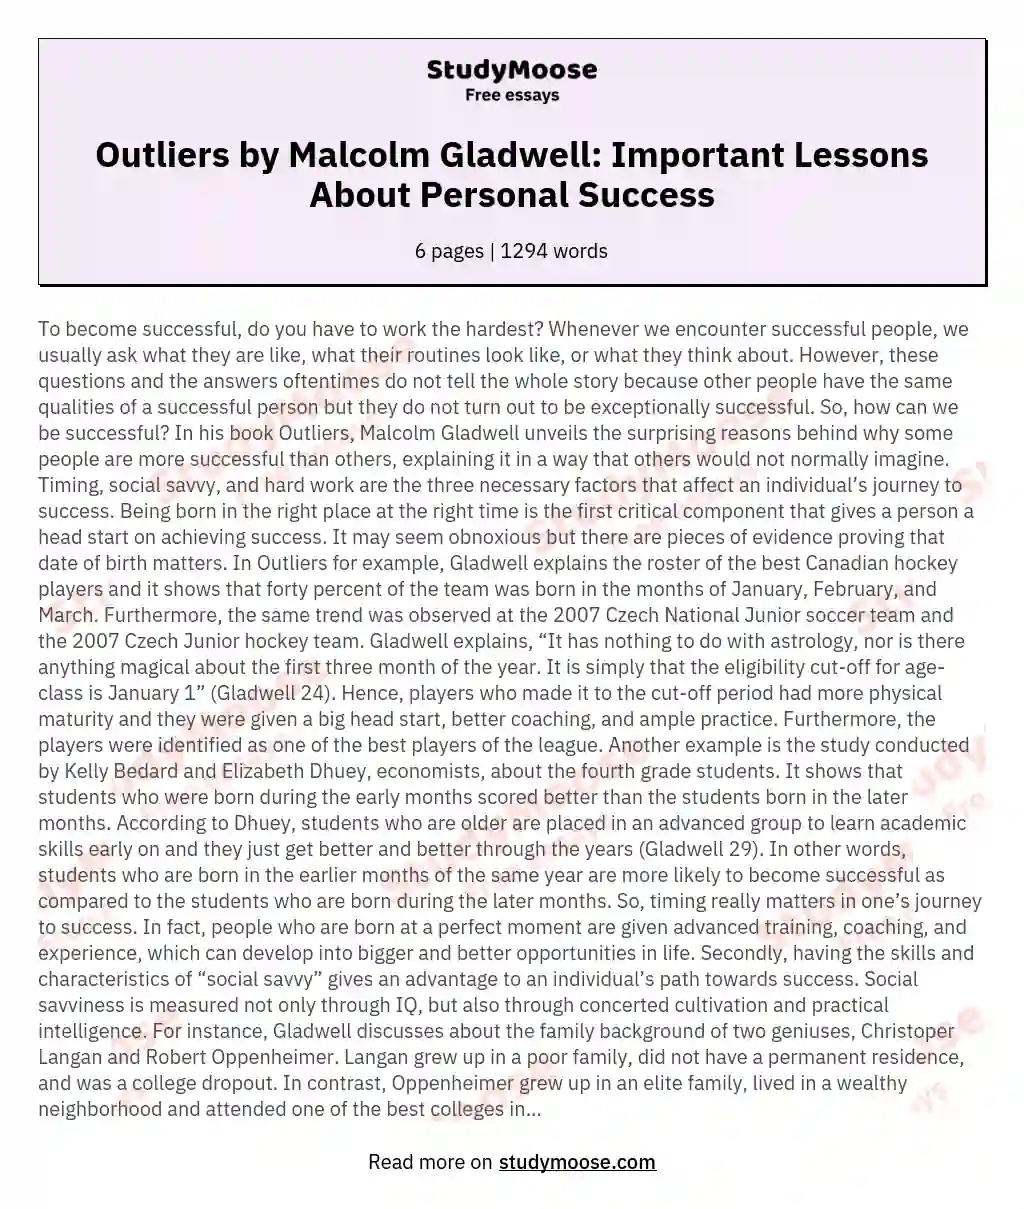 Outliers by Malcolm Gladwell: Important Lessons About Personal Success